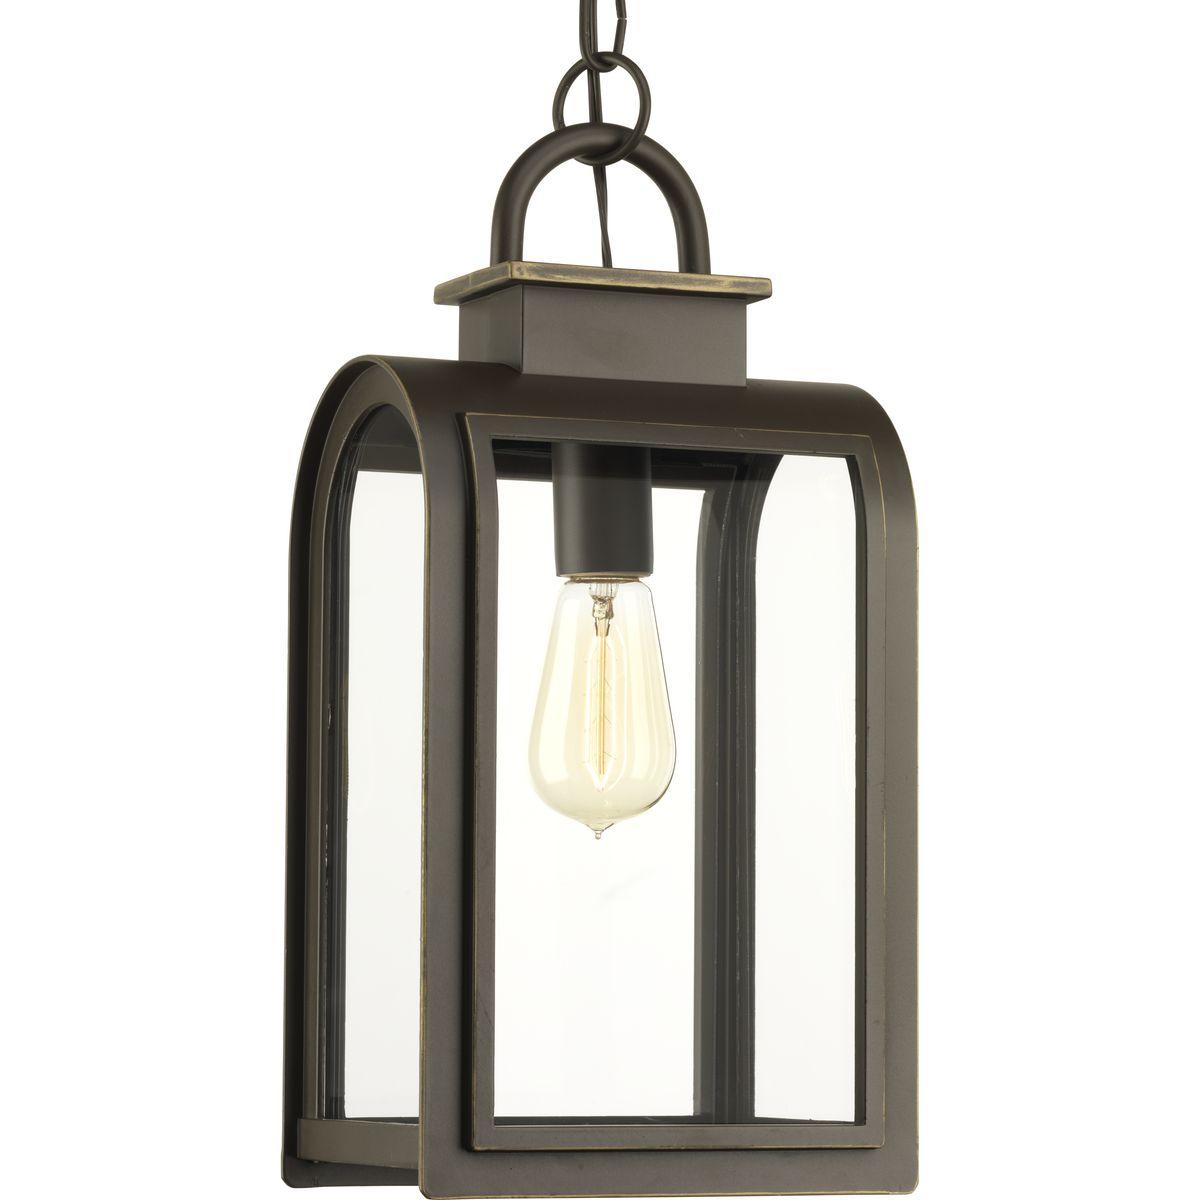 Hubbell P6531-108 One-light hanging lantern in a Cape Cod-inspired frame pays homage to a classic nautical style. Light output and geometric forms offer visual interest to outdoor exteriors. Clear glass windows provides a beautiful effect when illuminated.  ; Cape Cod-insp